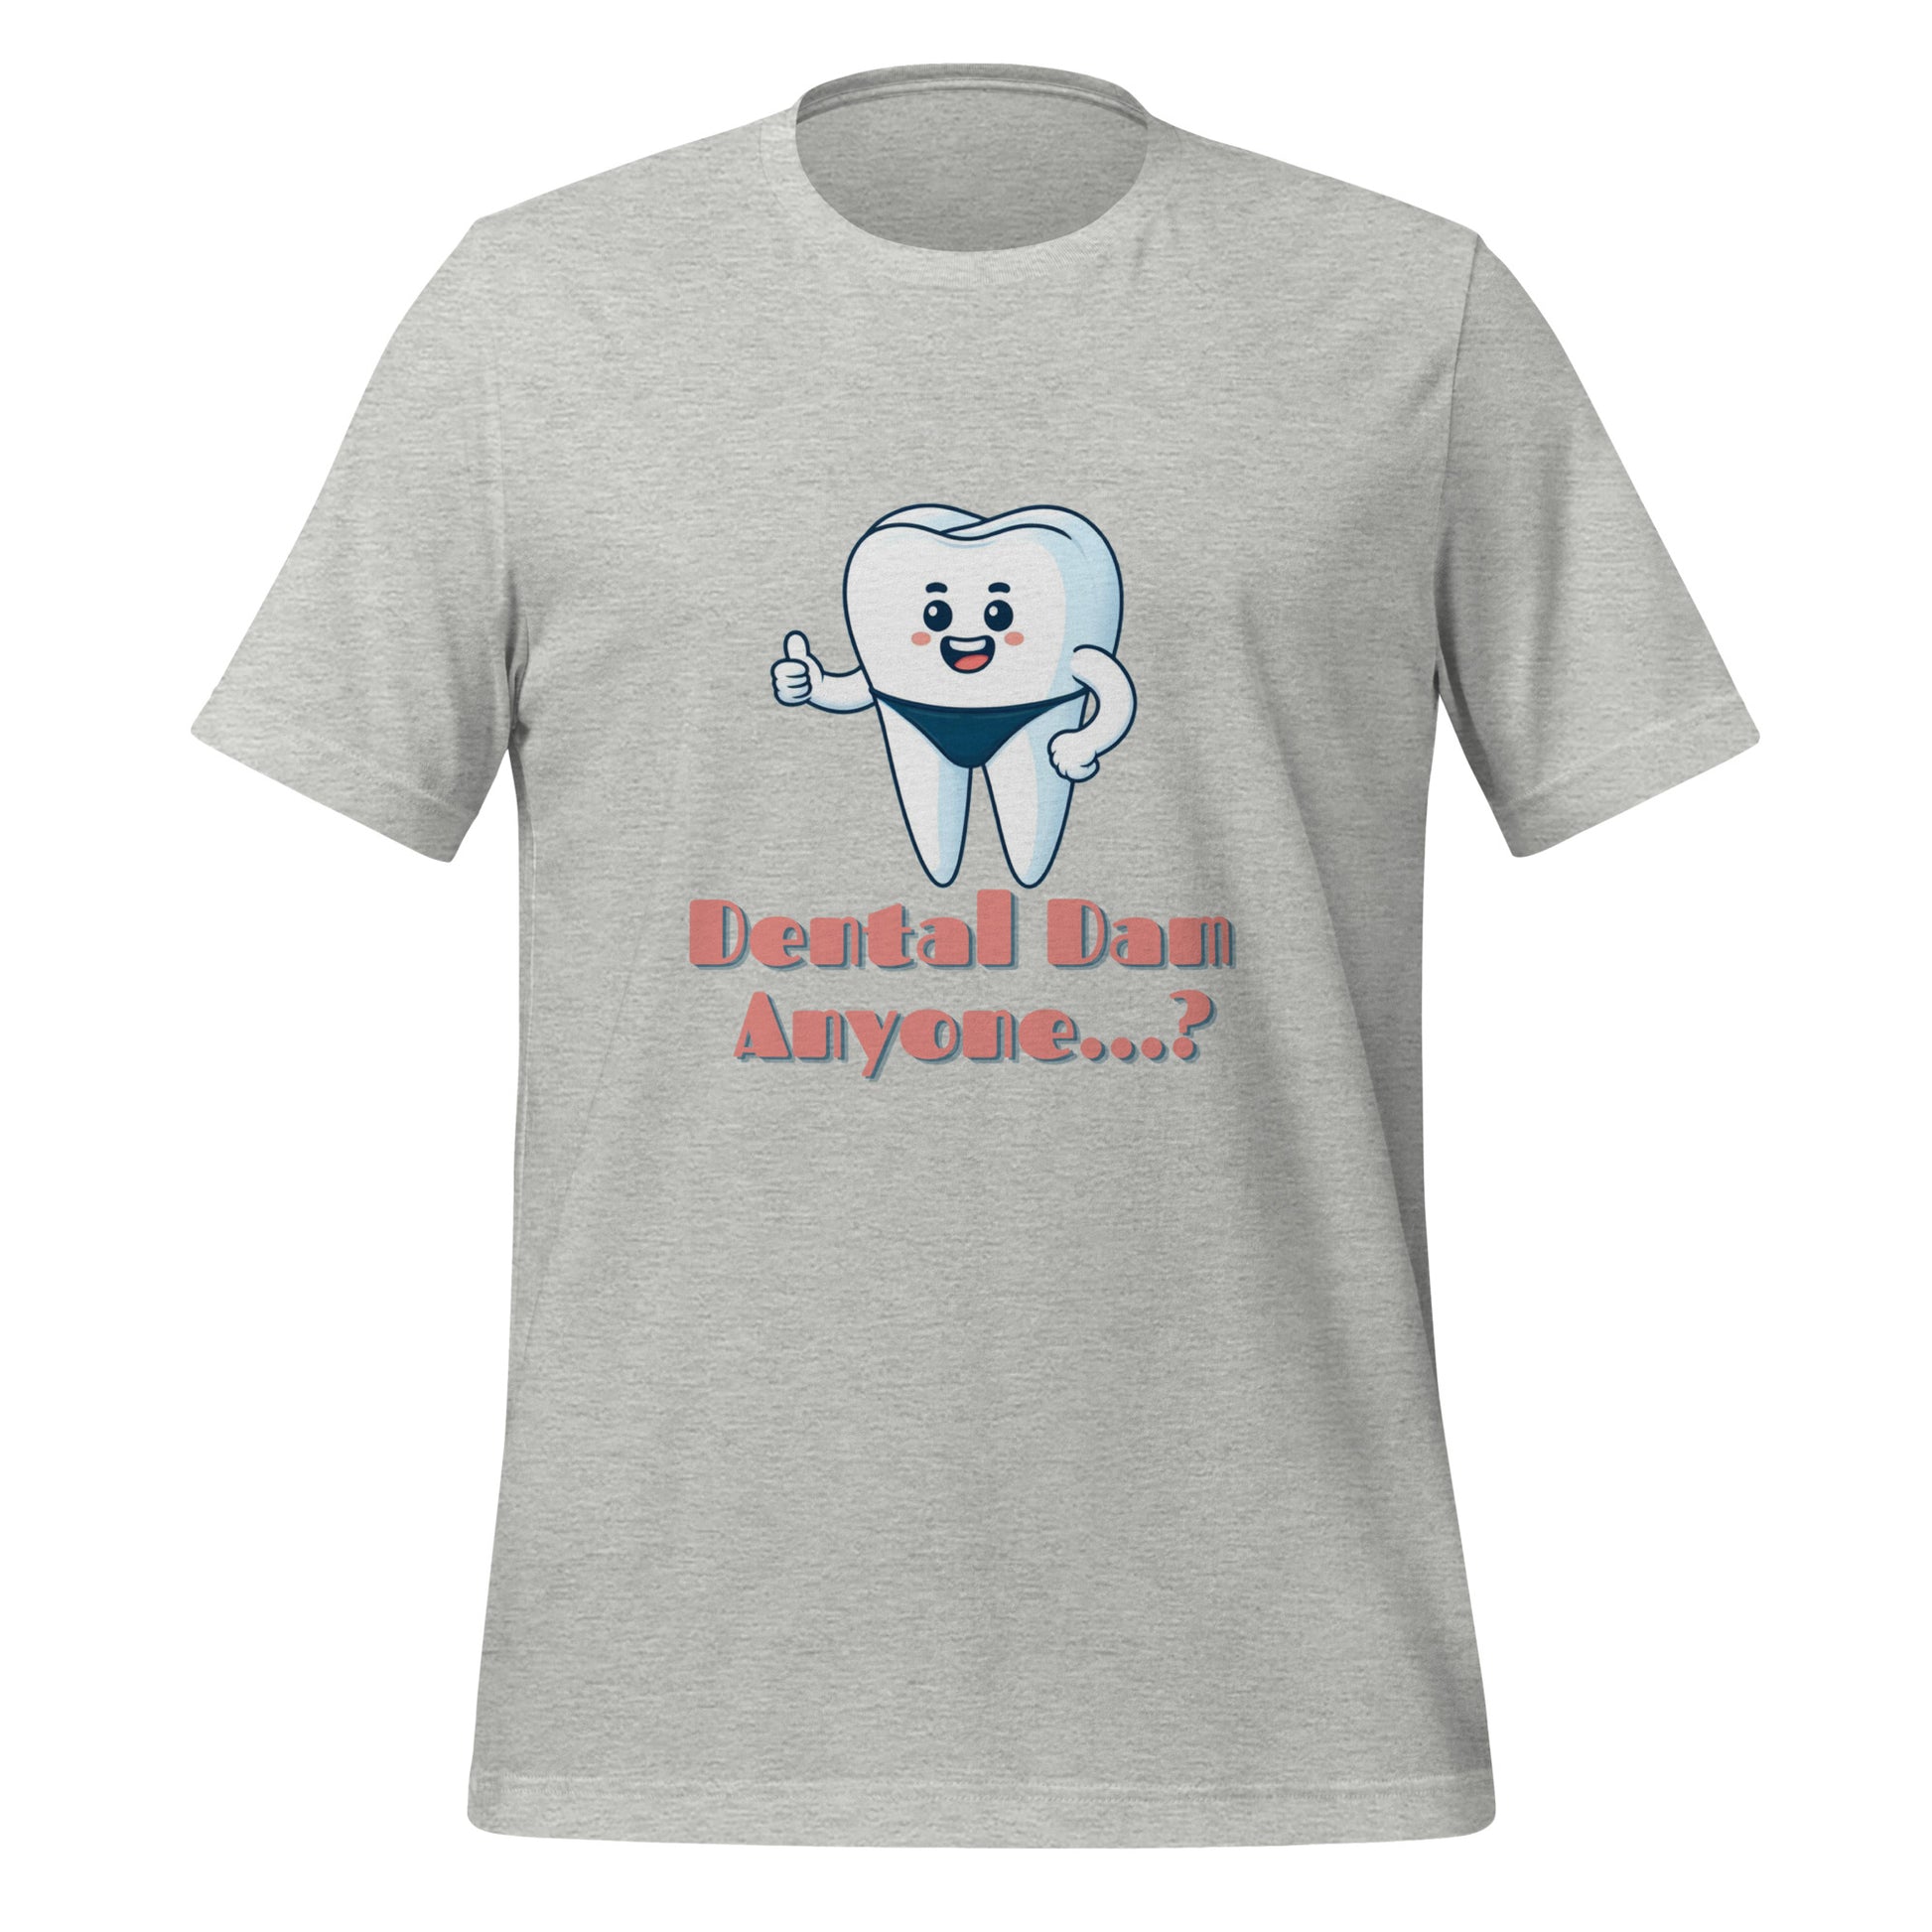 Funny dental shirt featuring a playful tooth character in a speedo with the text ‘Dental Dam Anyone?’, perfect for dentists, dental hygienists, and dental students who enjoy dental humor. This dental shirt is a unique addition to any dental professional’s wardrobe, making it an ideal dental office shirt. Don’t miss out on our dental assistant shirts and dental hygiene shirts. Athletic heather color.